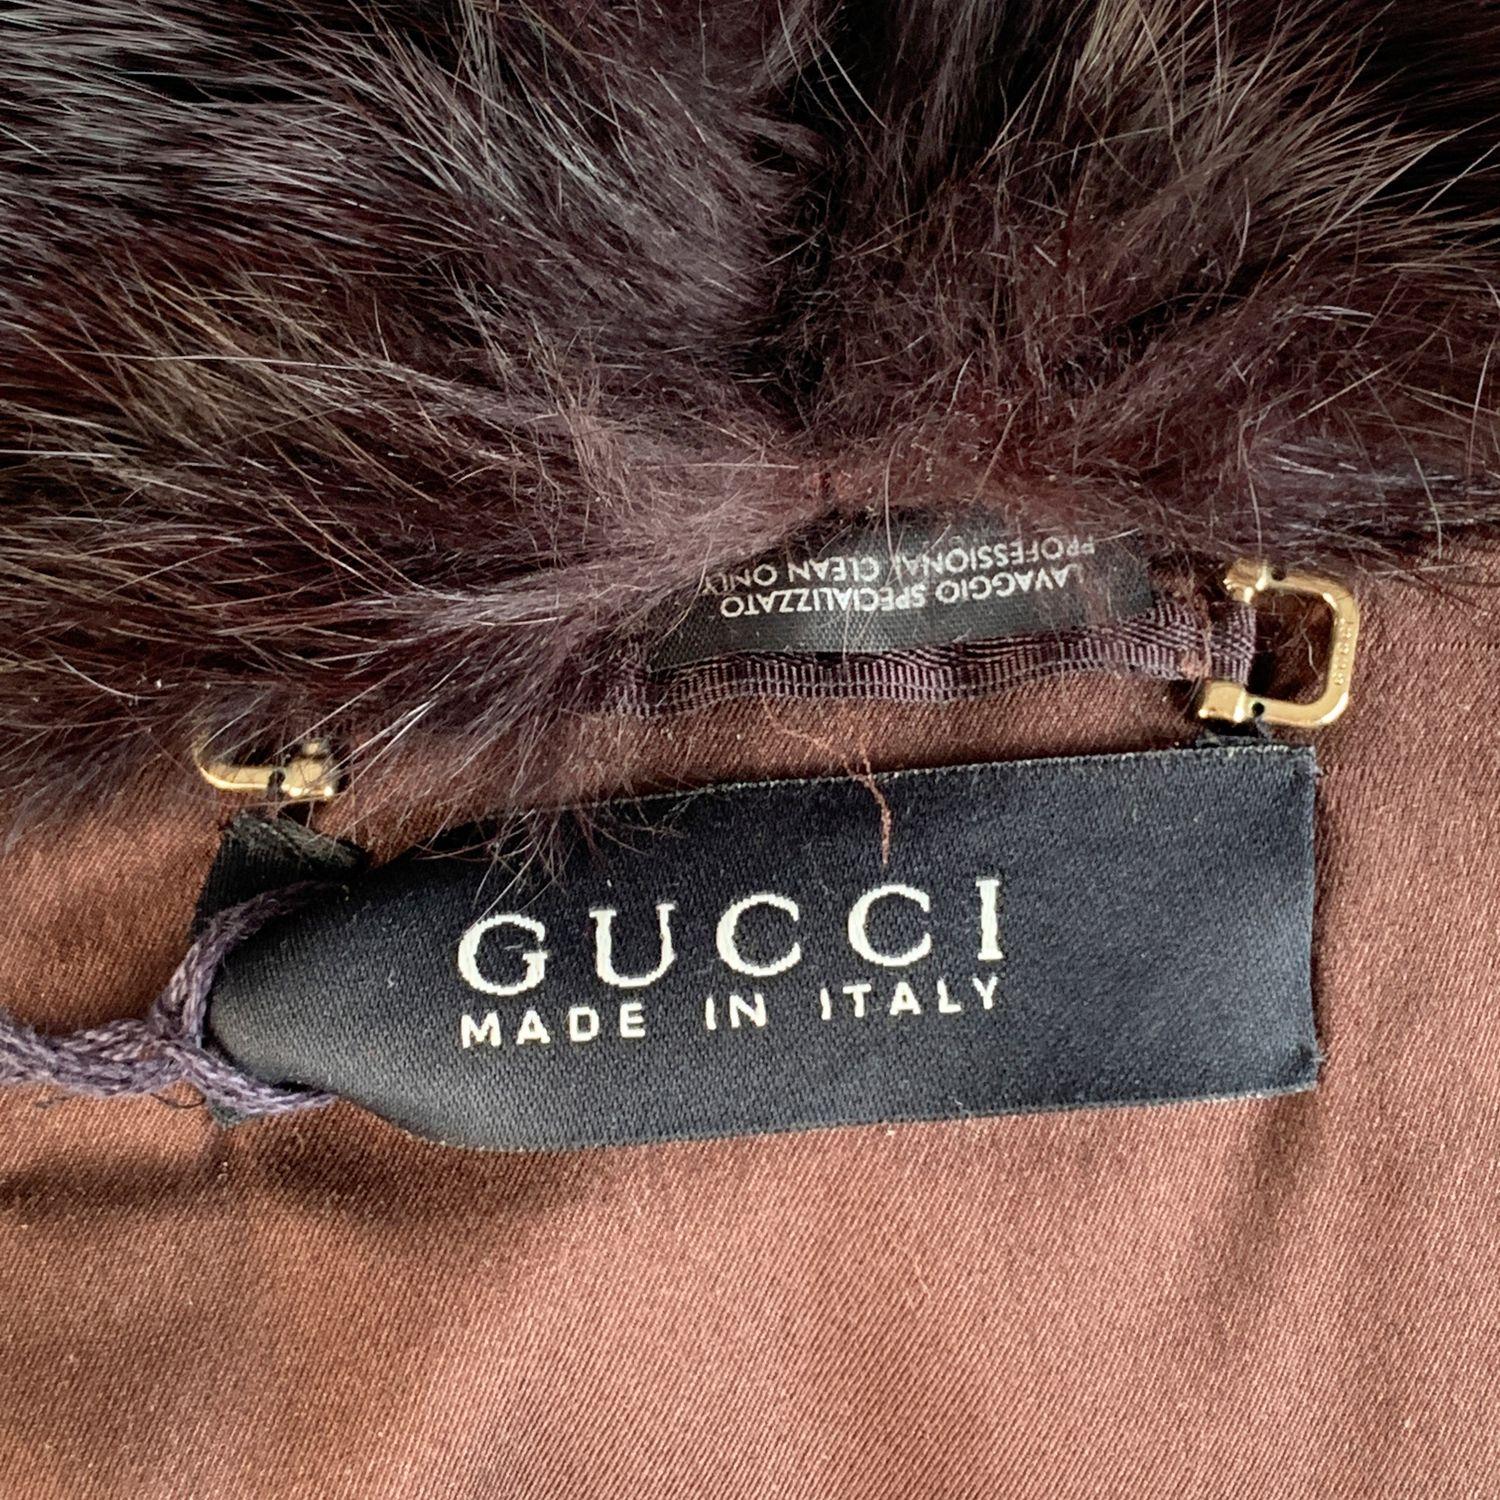 - Gucci Biker Style Jacket
- Brown leather
- Removable fur collar
- Front zip closure on the front
- Long sleeve styling with zipped cuffs
- Zip pockets on the front
- Silk lining
- Size: 40 IT. it should correspond to a SMALL size
- Made in